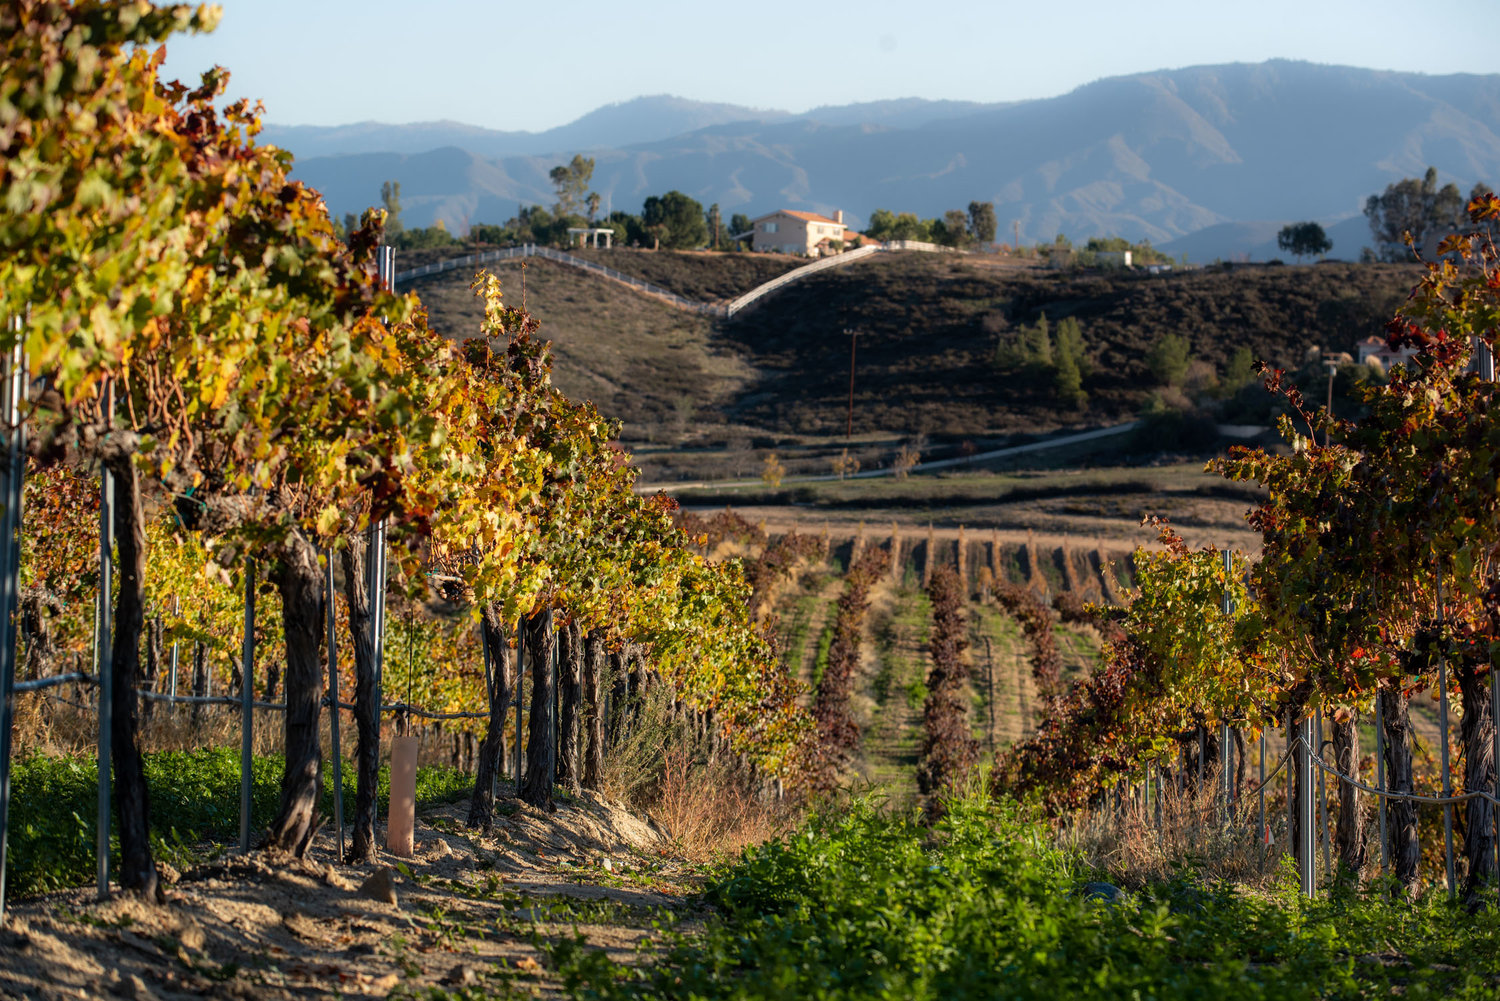 Plan A Trip or Vacation To Temecula Wine Country